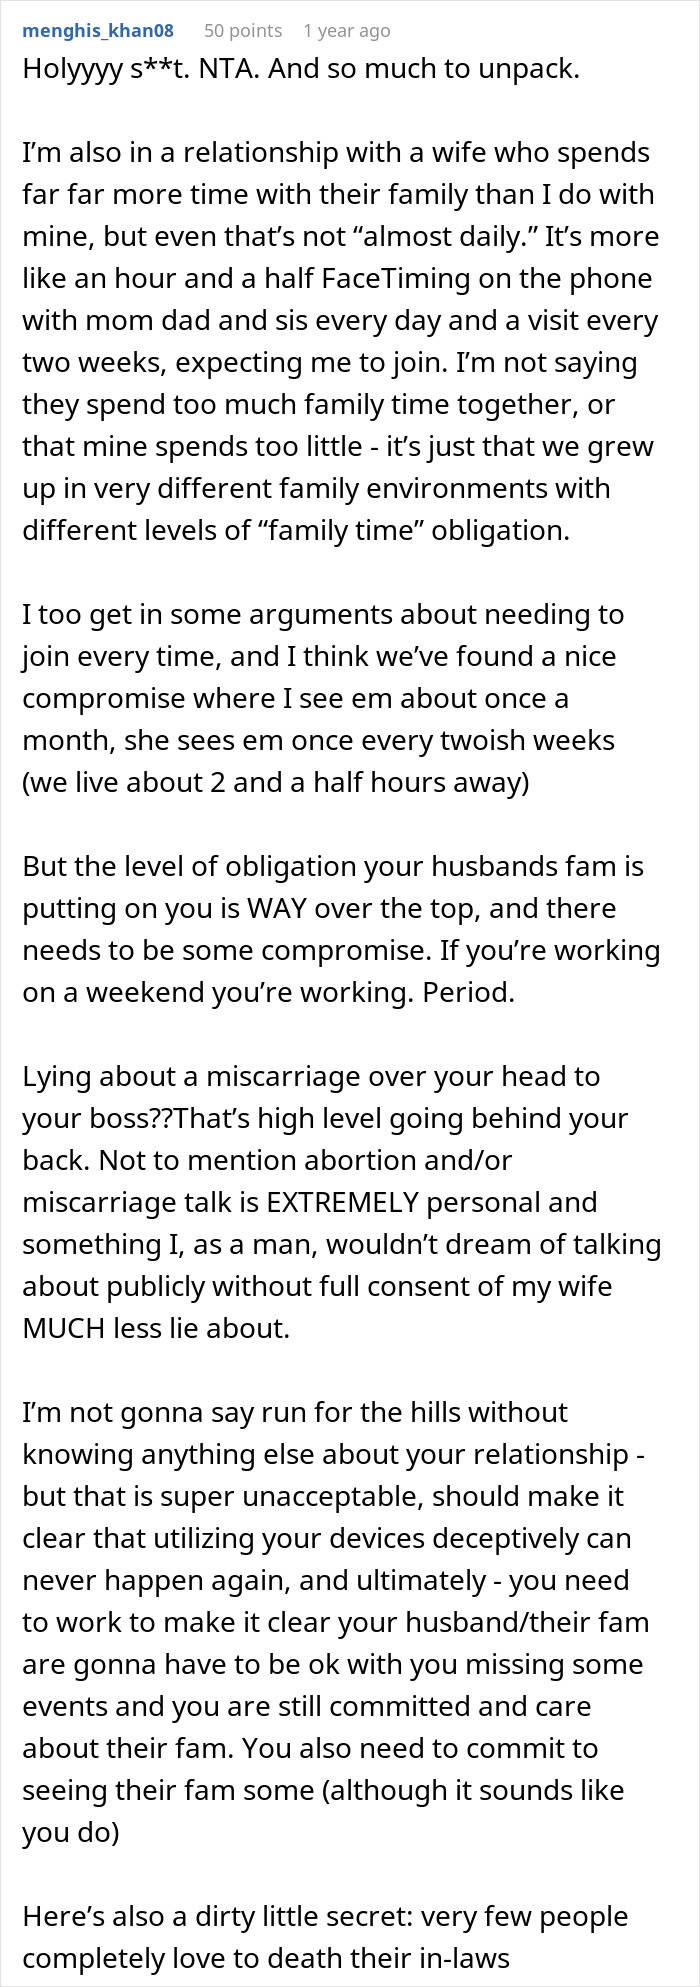 "He Pitched A Hissy Fit": Husband Demands Wife Come To Party, Lies About Her Miscarriage